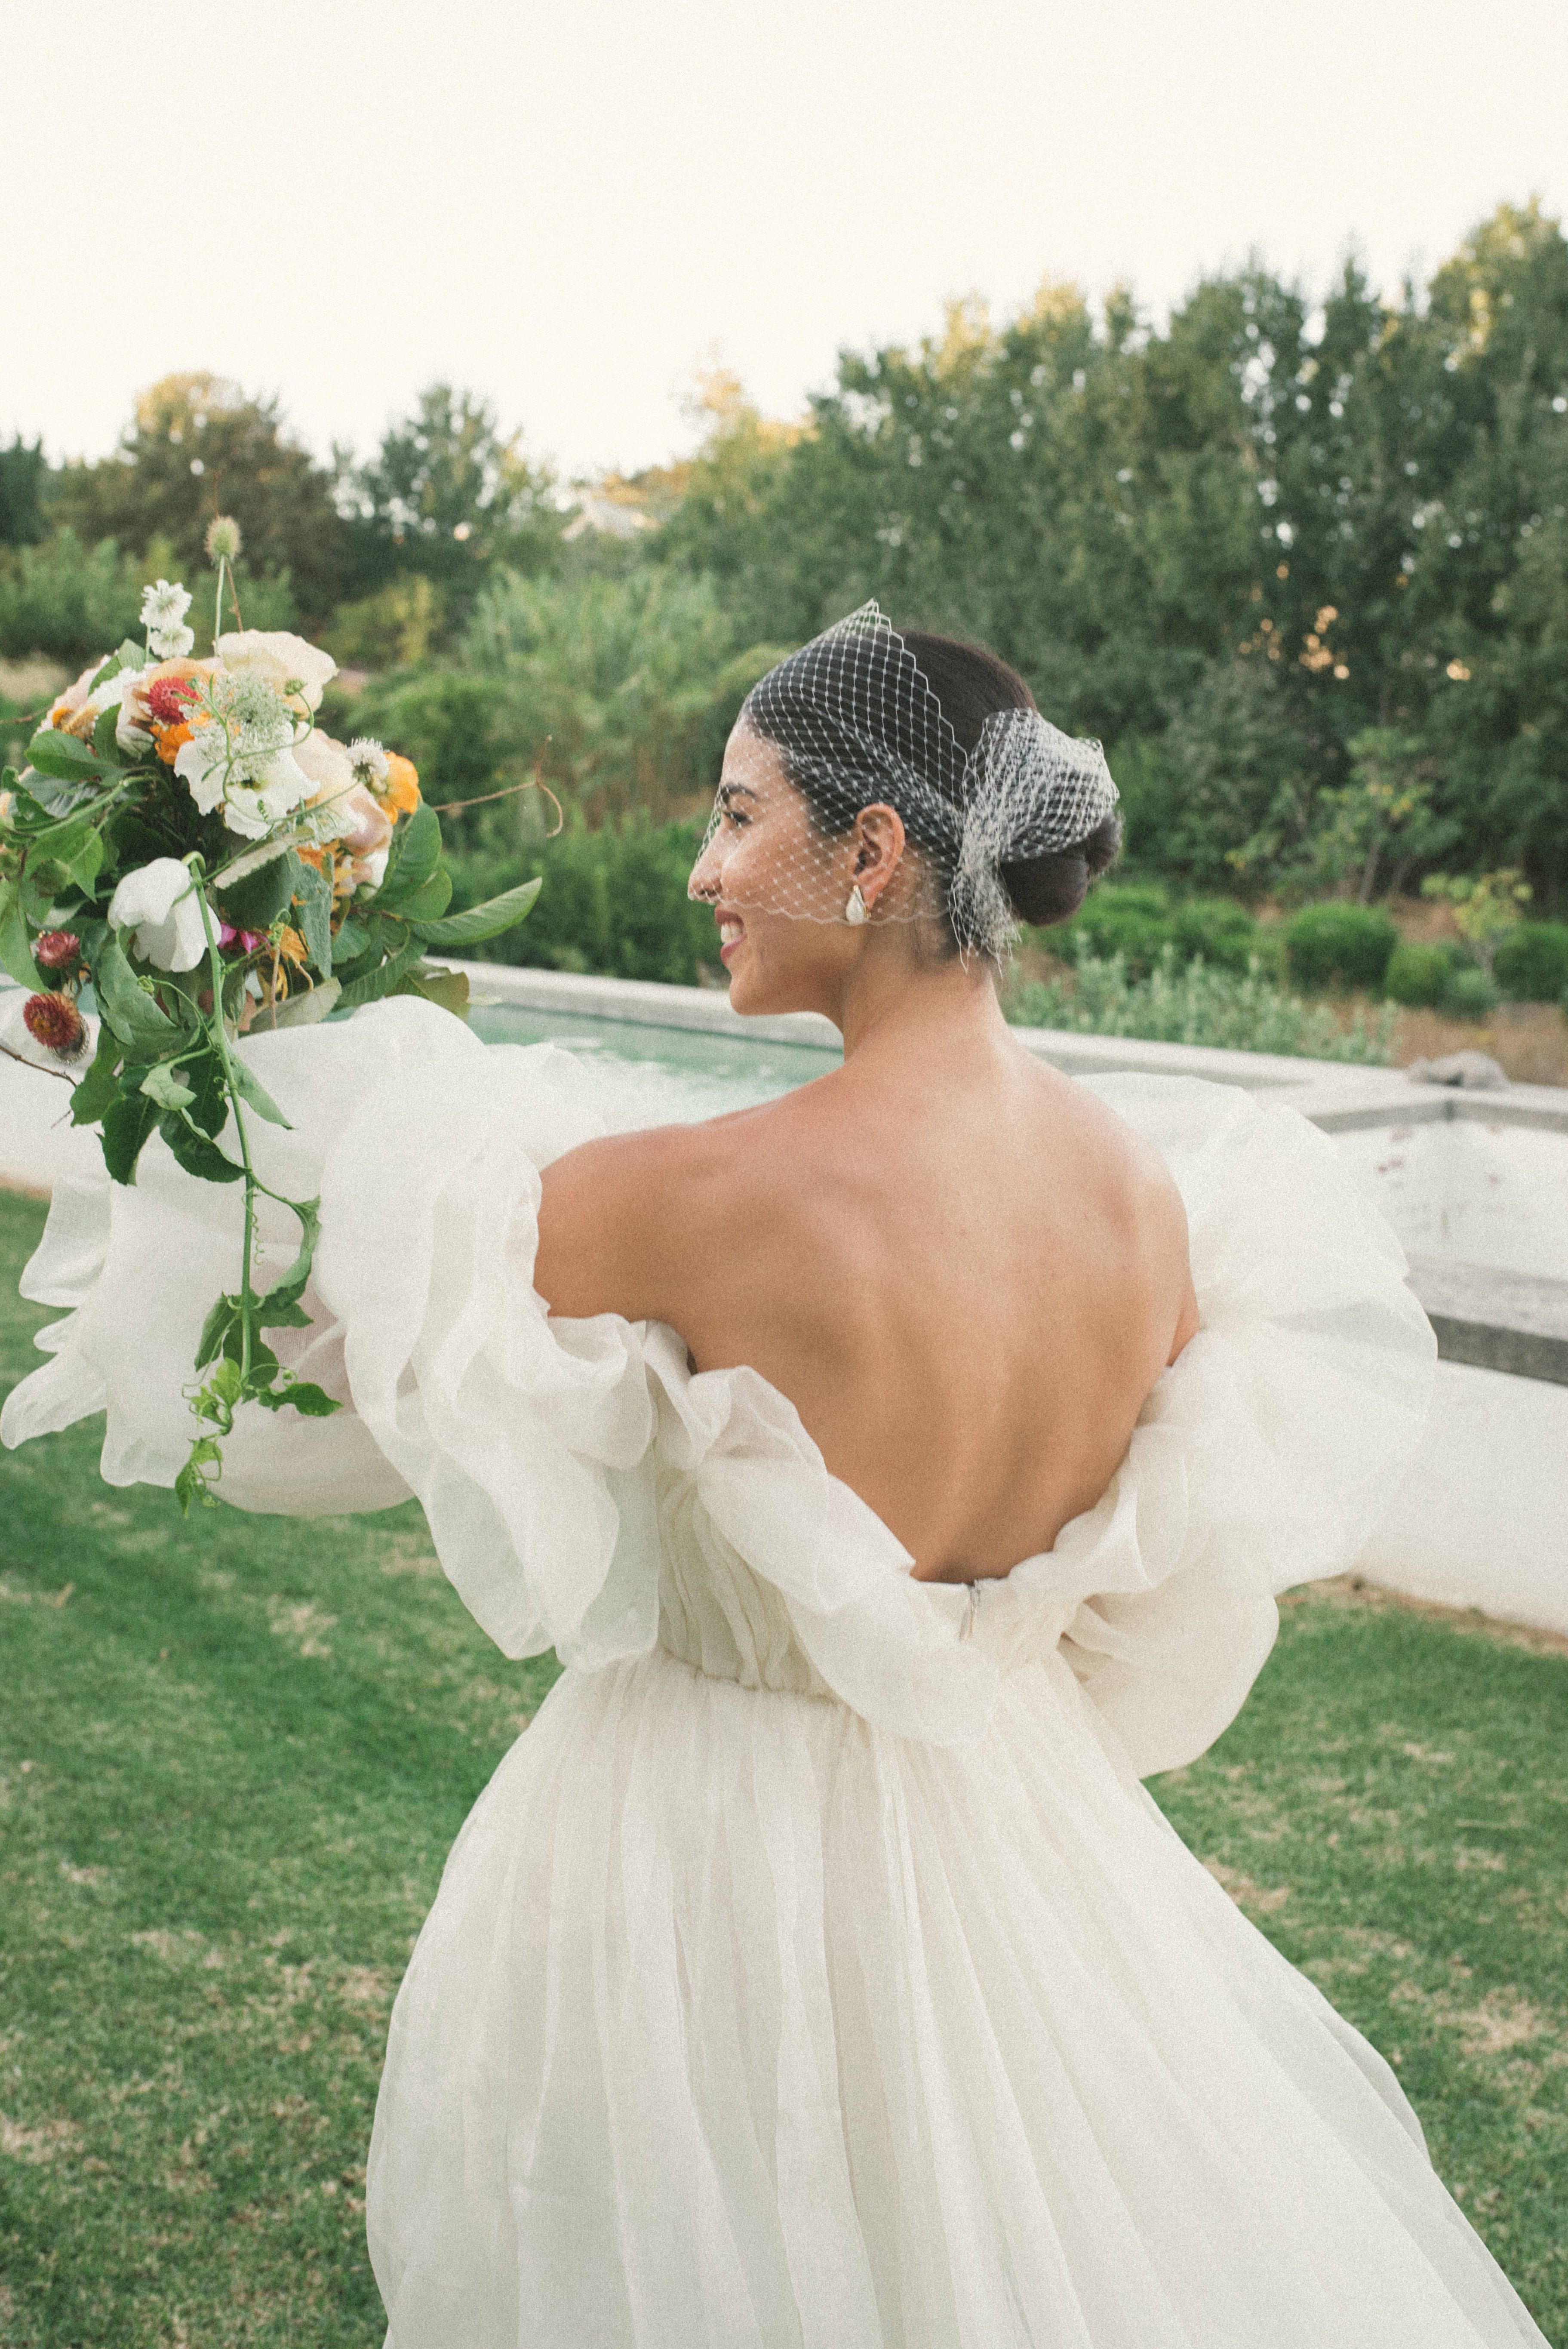 Wedding dress ideas  The chicest inspiration from real brides